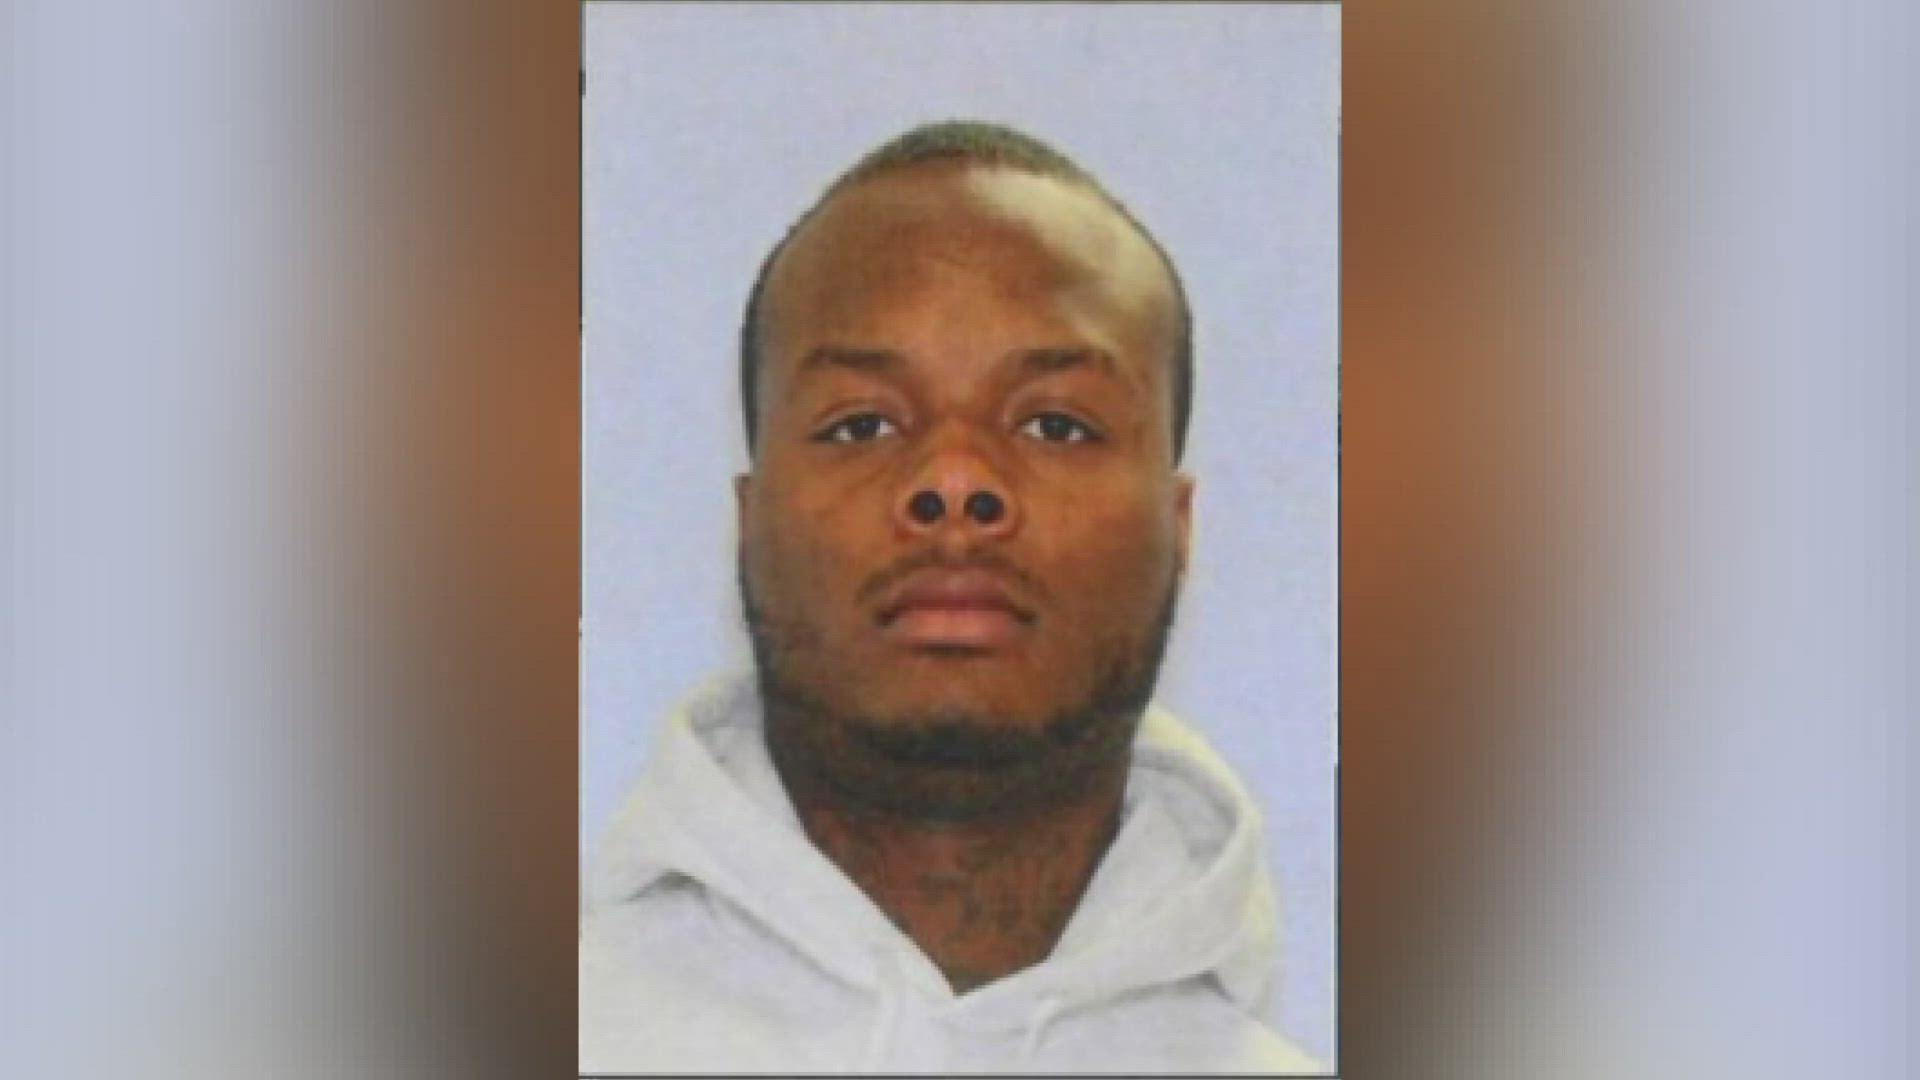 Police have identified the suspect as 24-year-old Deshawn Anthony Vaughn